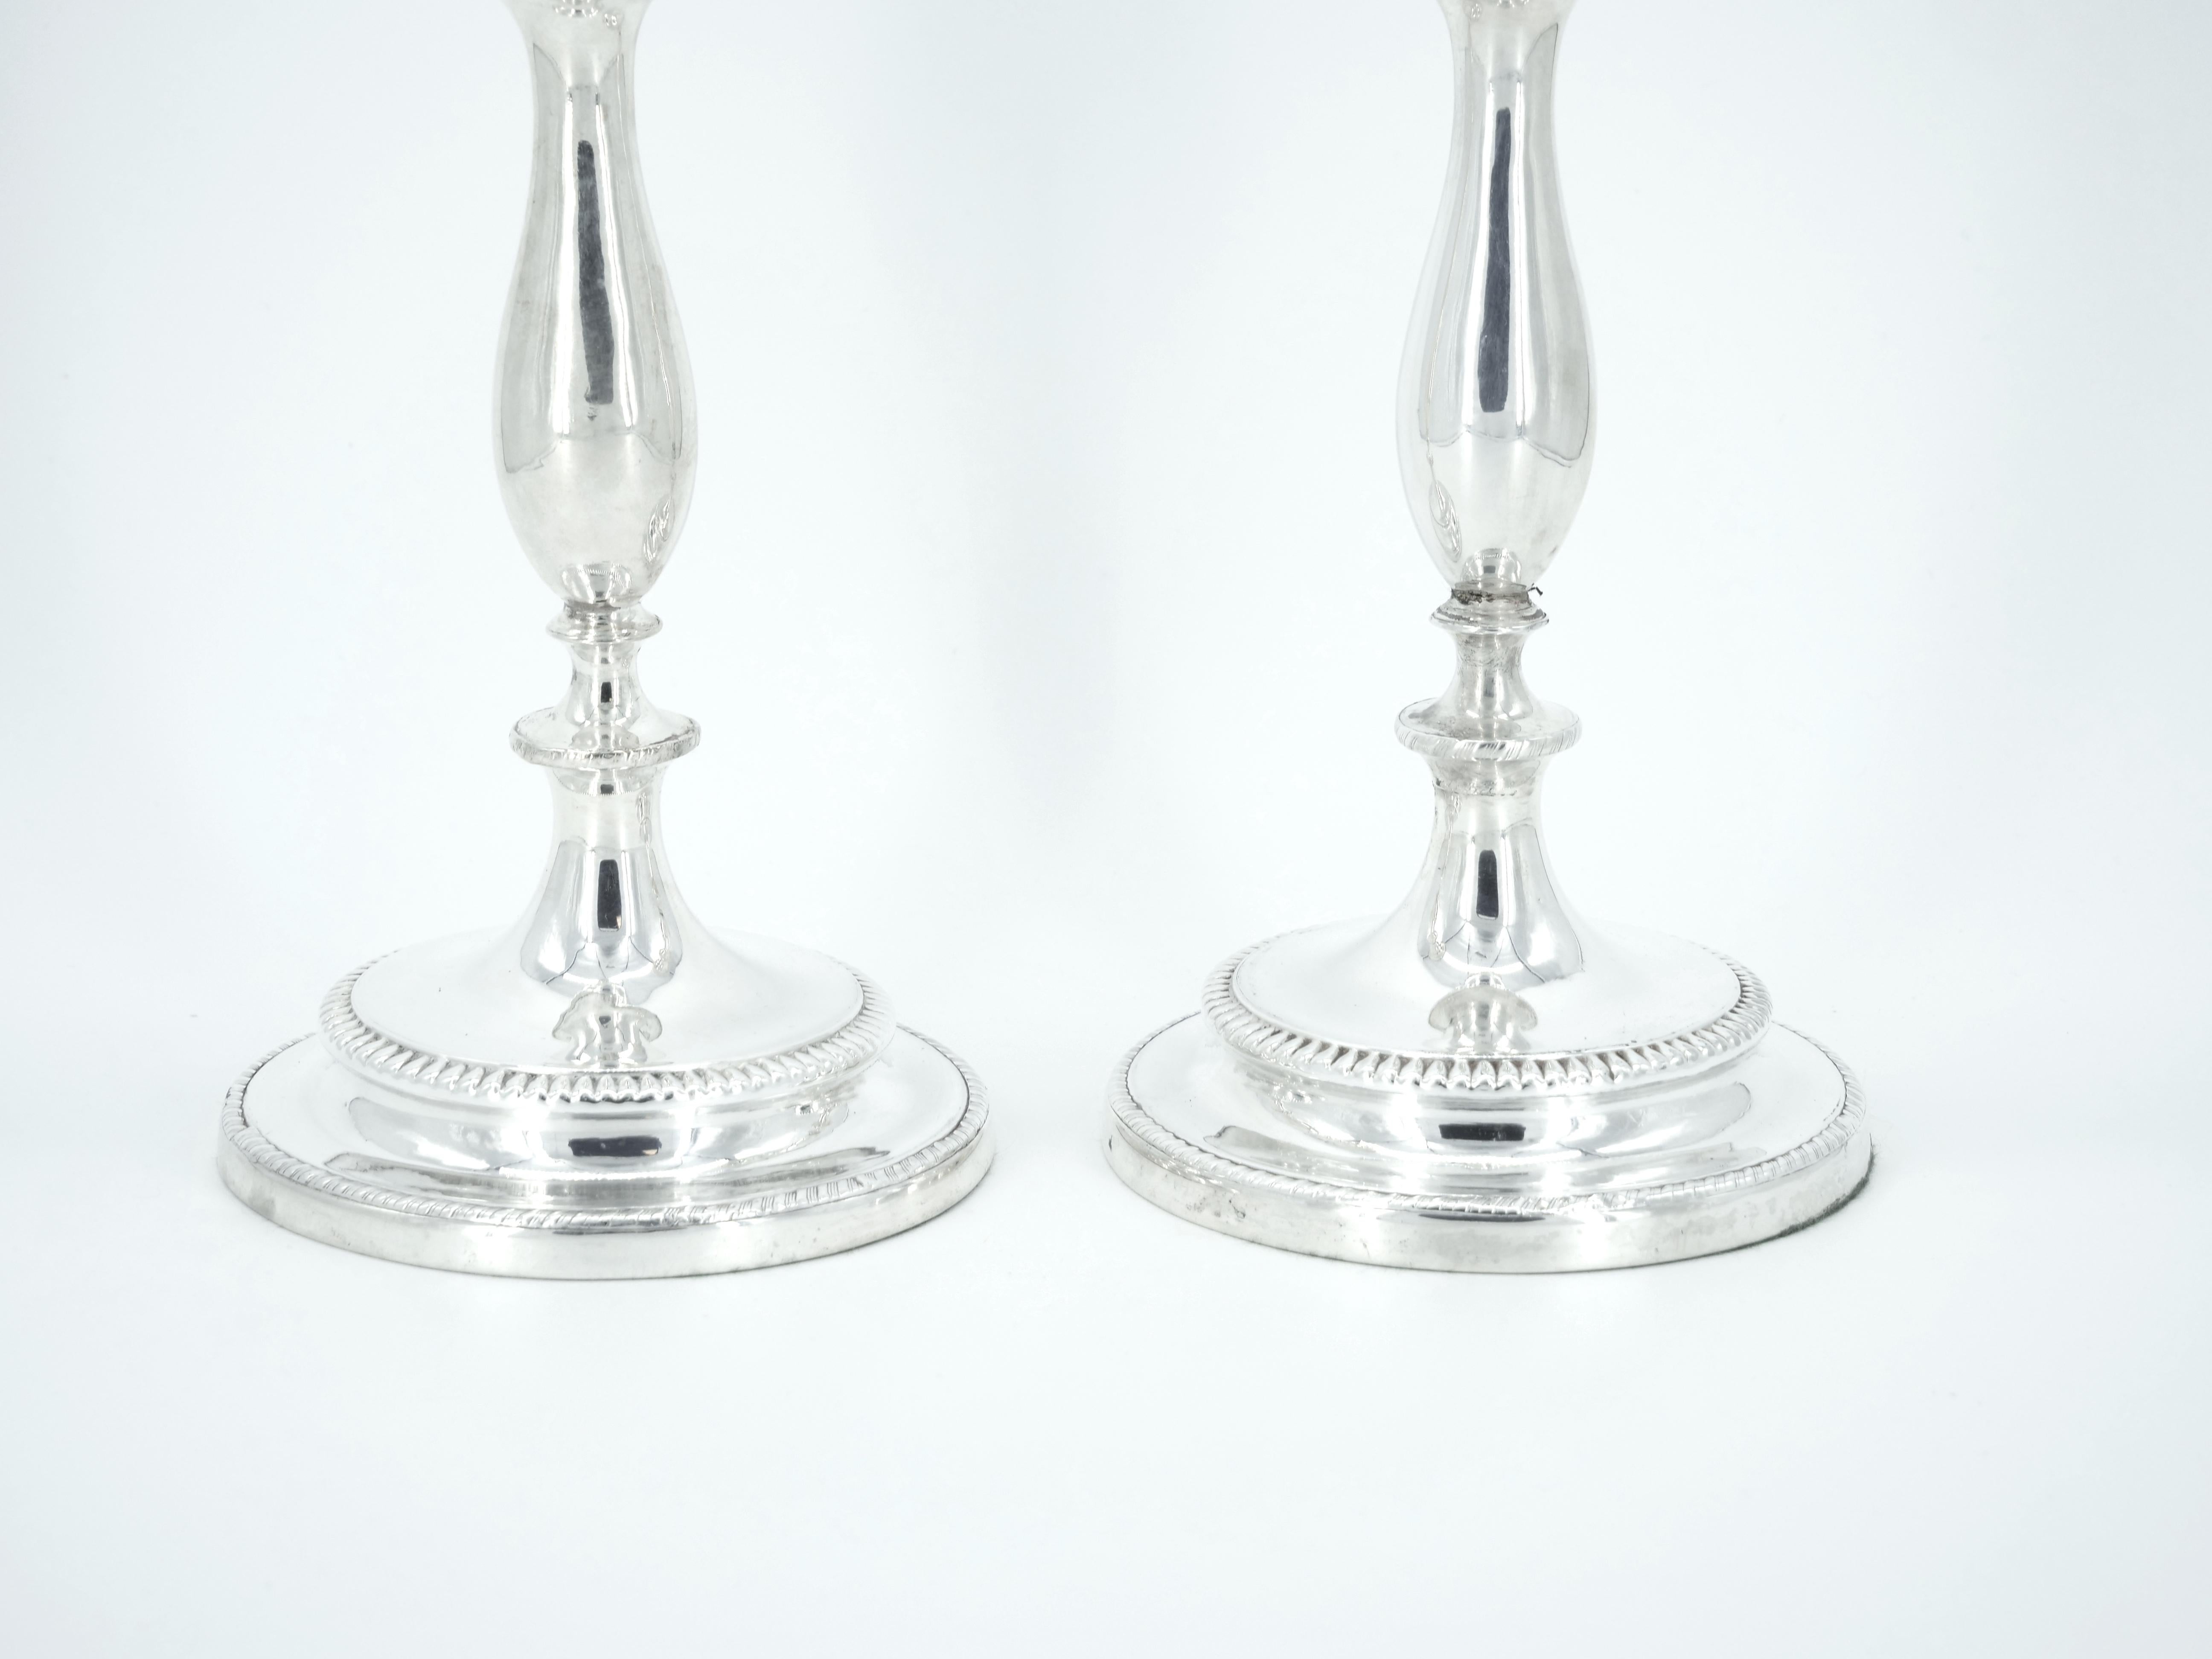 Pair English Regency Period Sheffield Plate Candlesticks circa 1800s For Sale 3